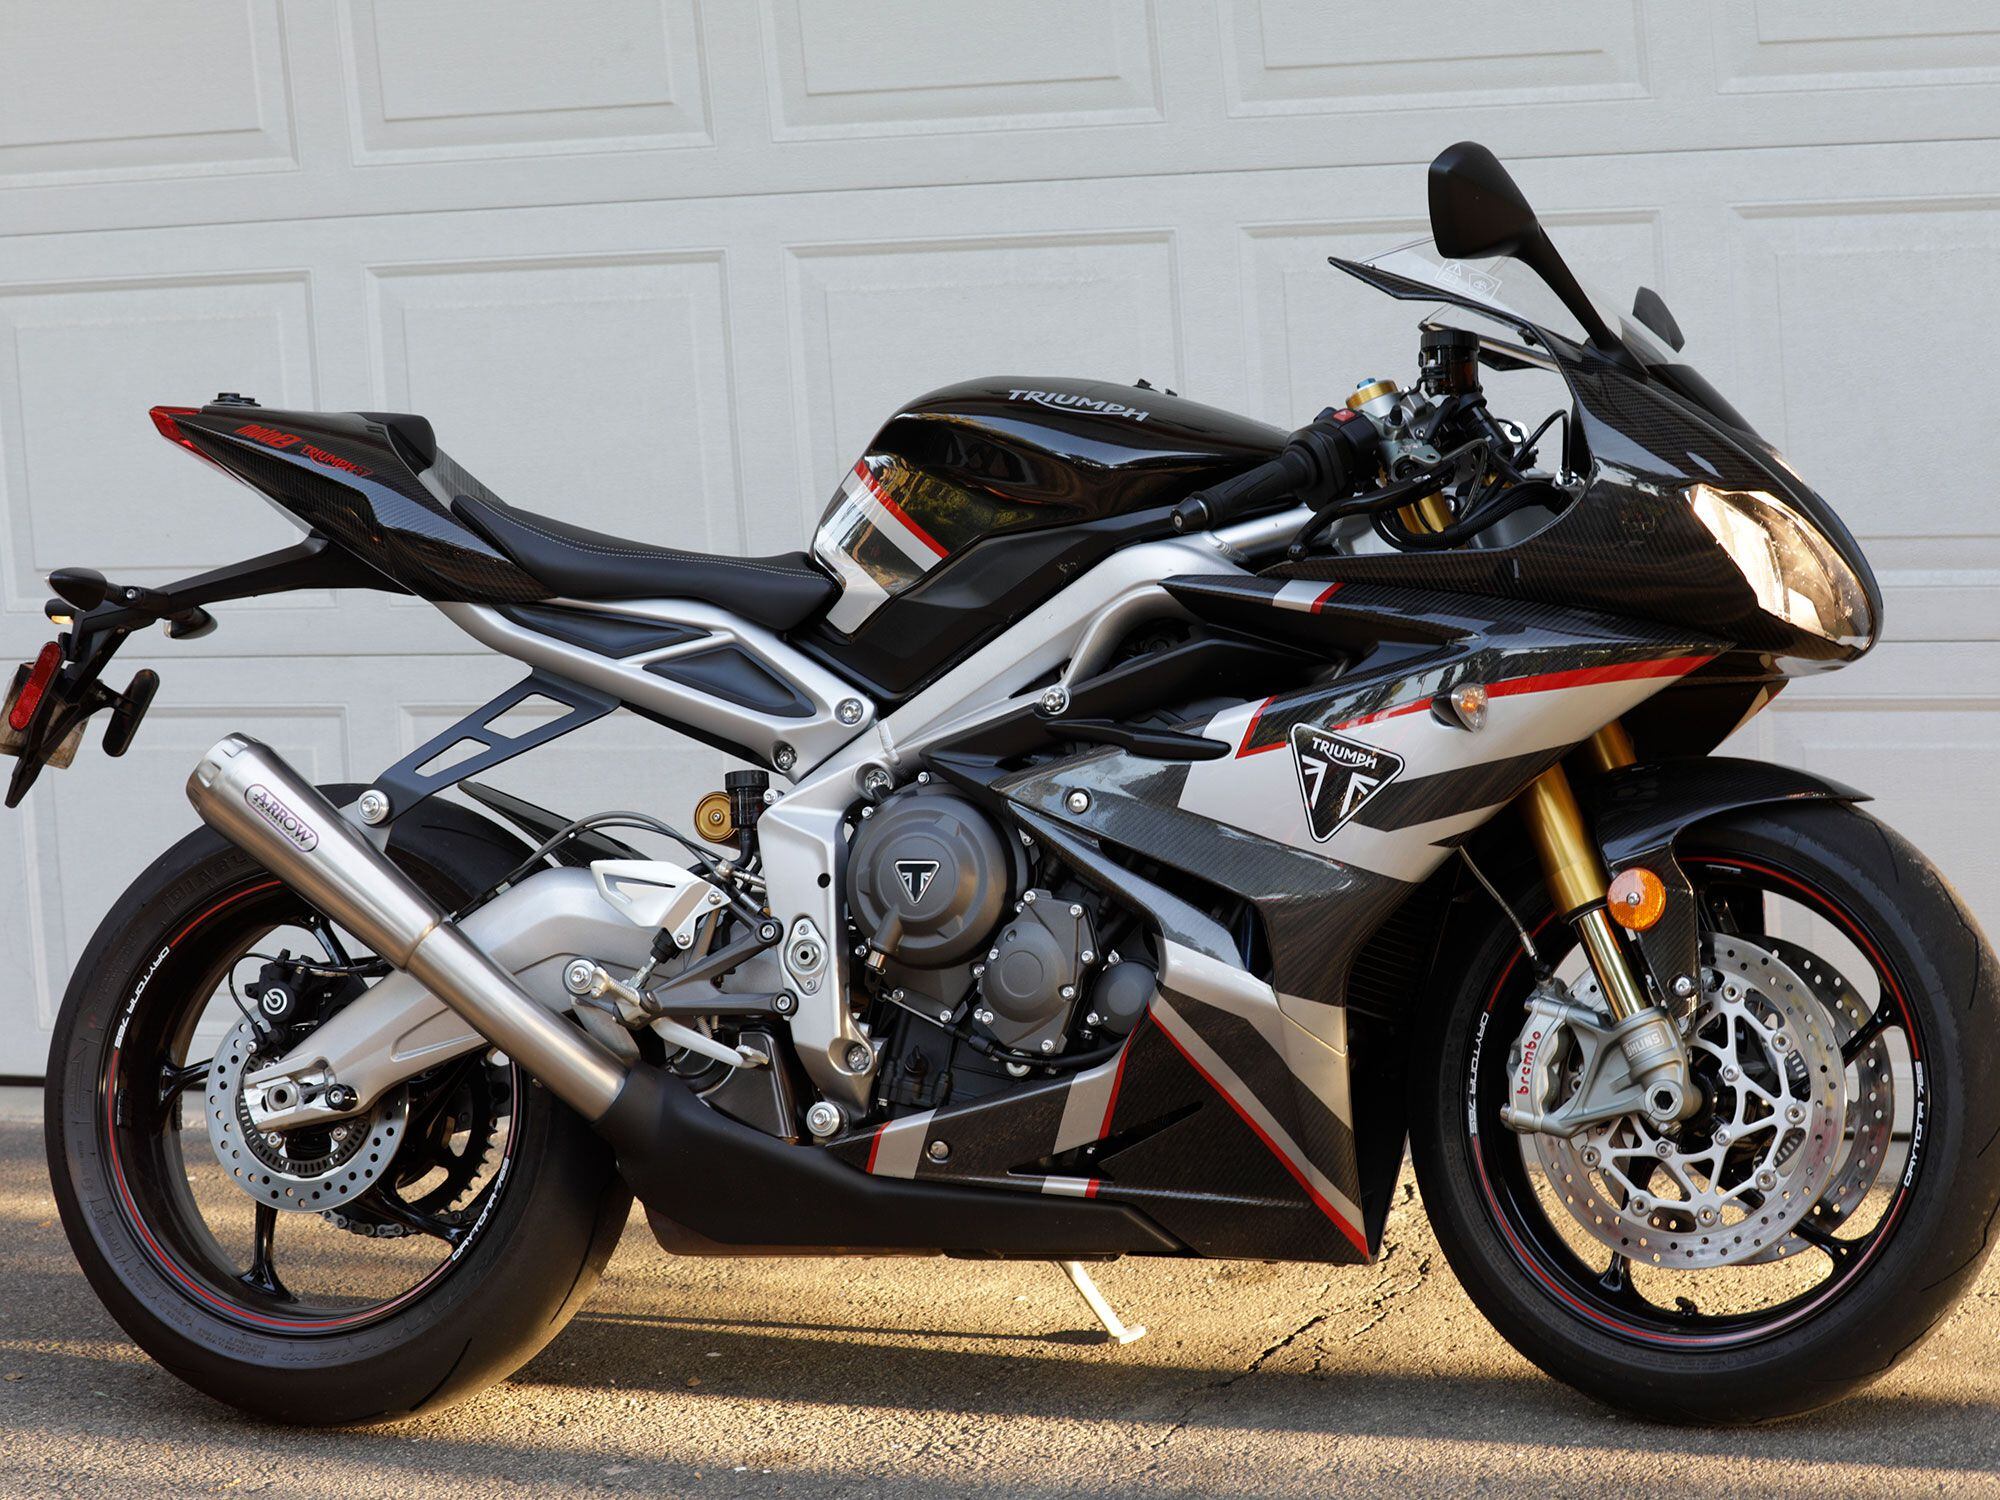 For those that want to own a piece of grand prix racing history that they can ride to work, enter the $17,500 Triumph Daytona Moto2 765 Limited Edition.